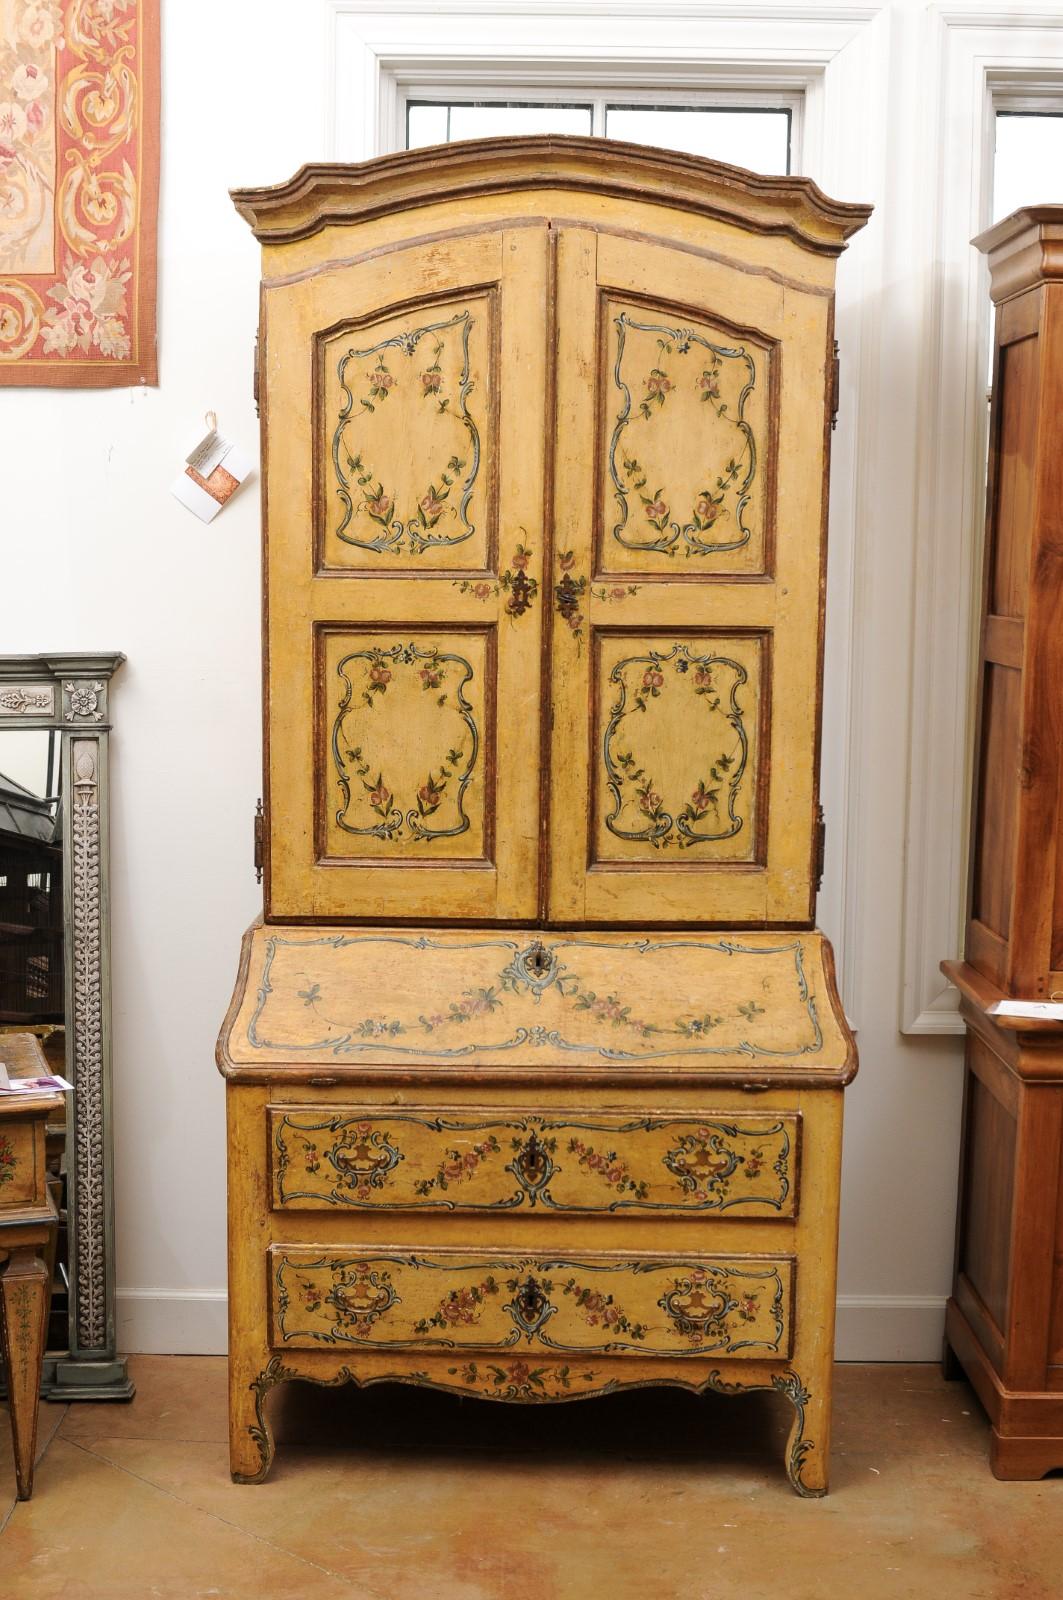 Italian 1760s Rococo Period Tall Secrétaire from Genoa with Hand Painted Décor 8